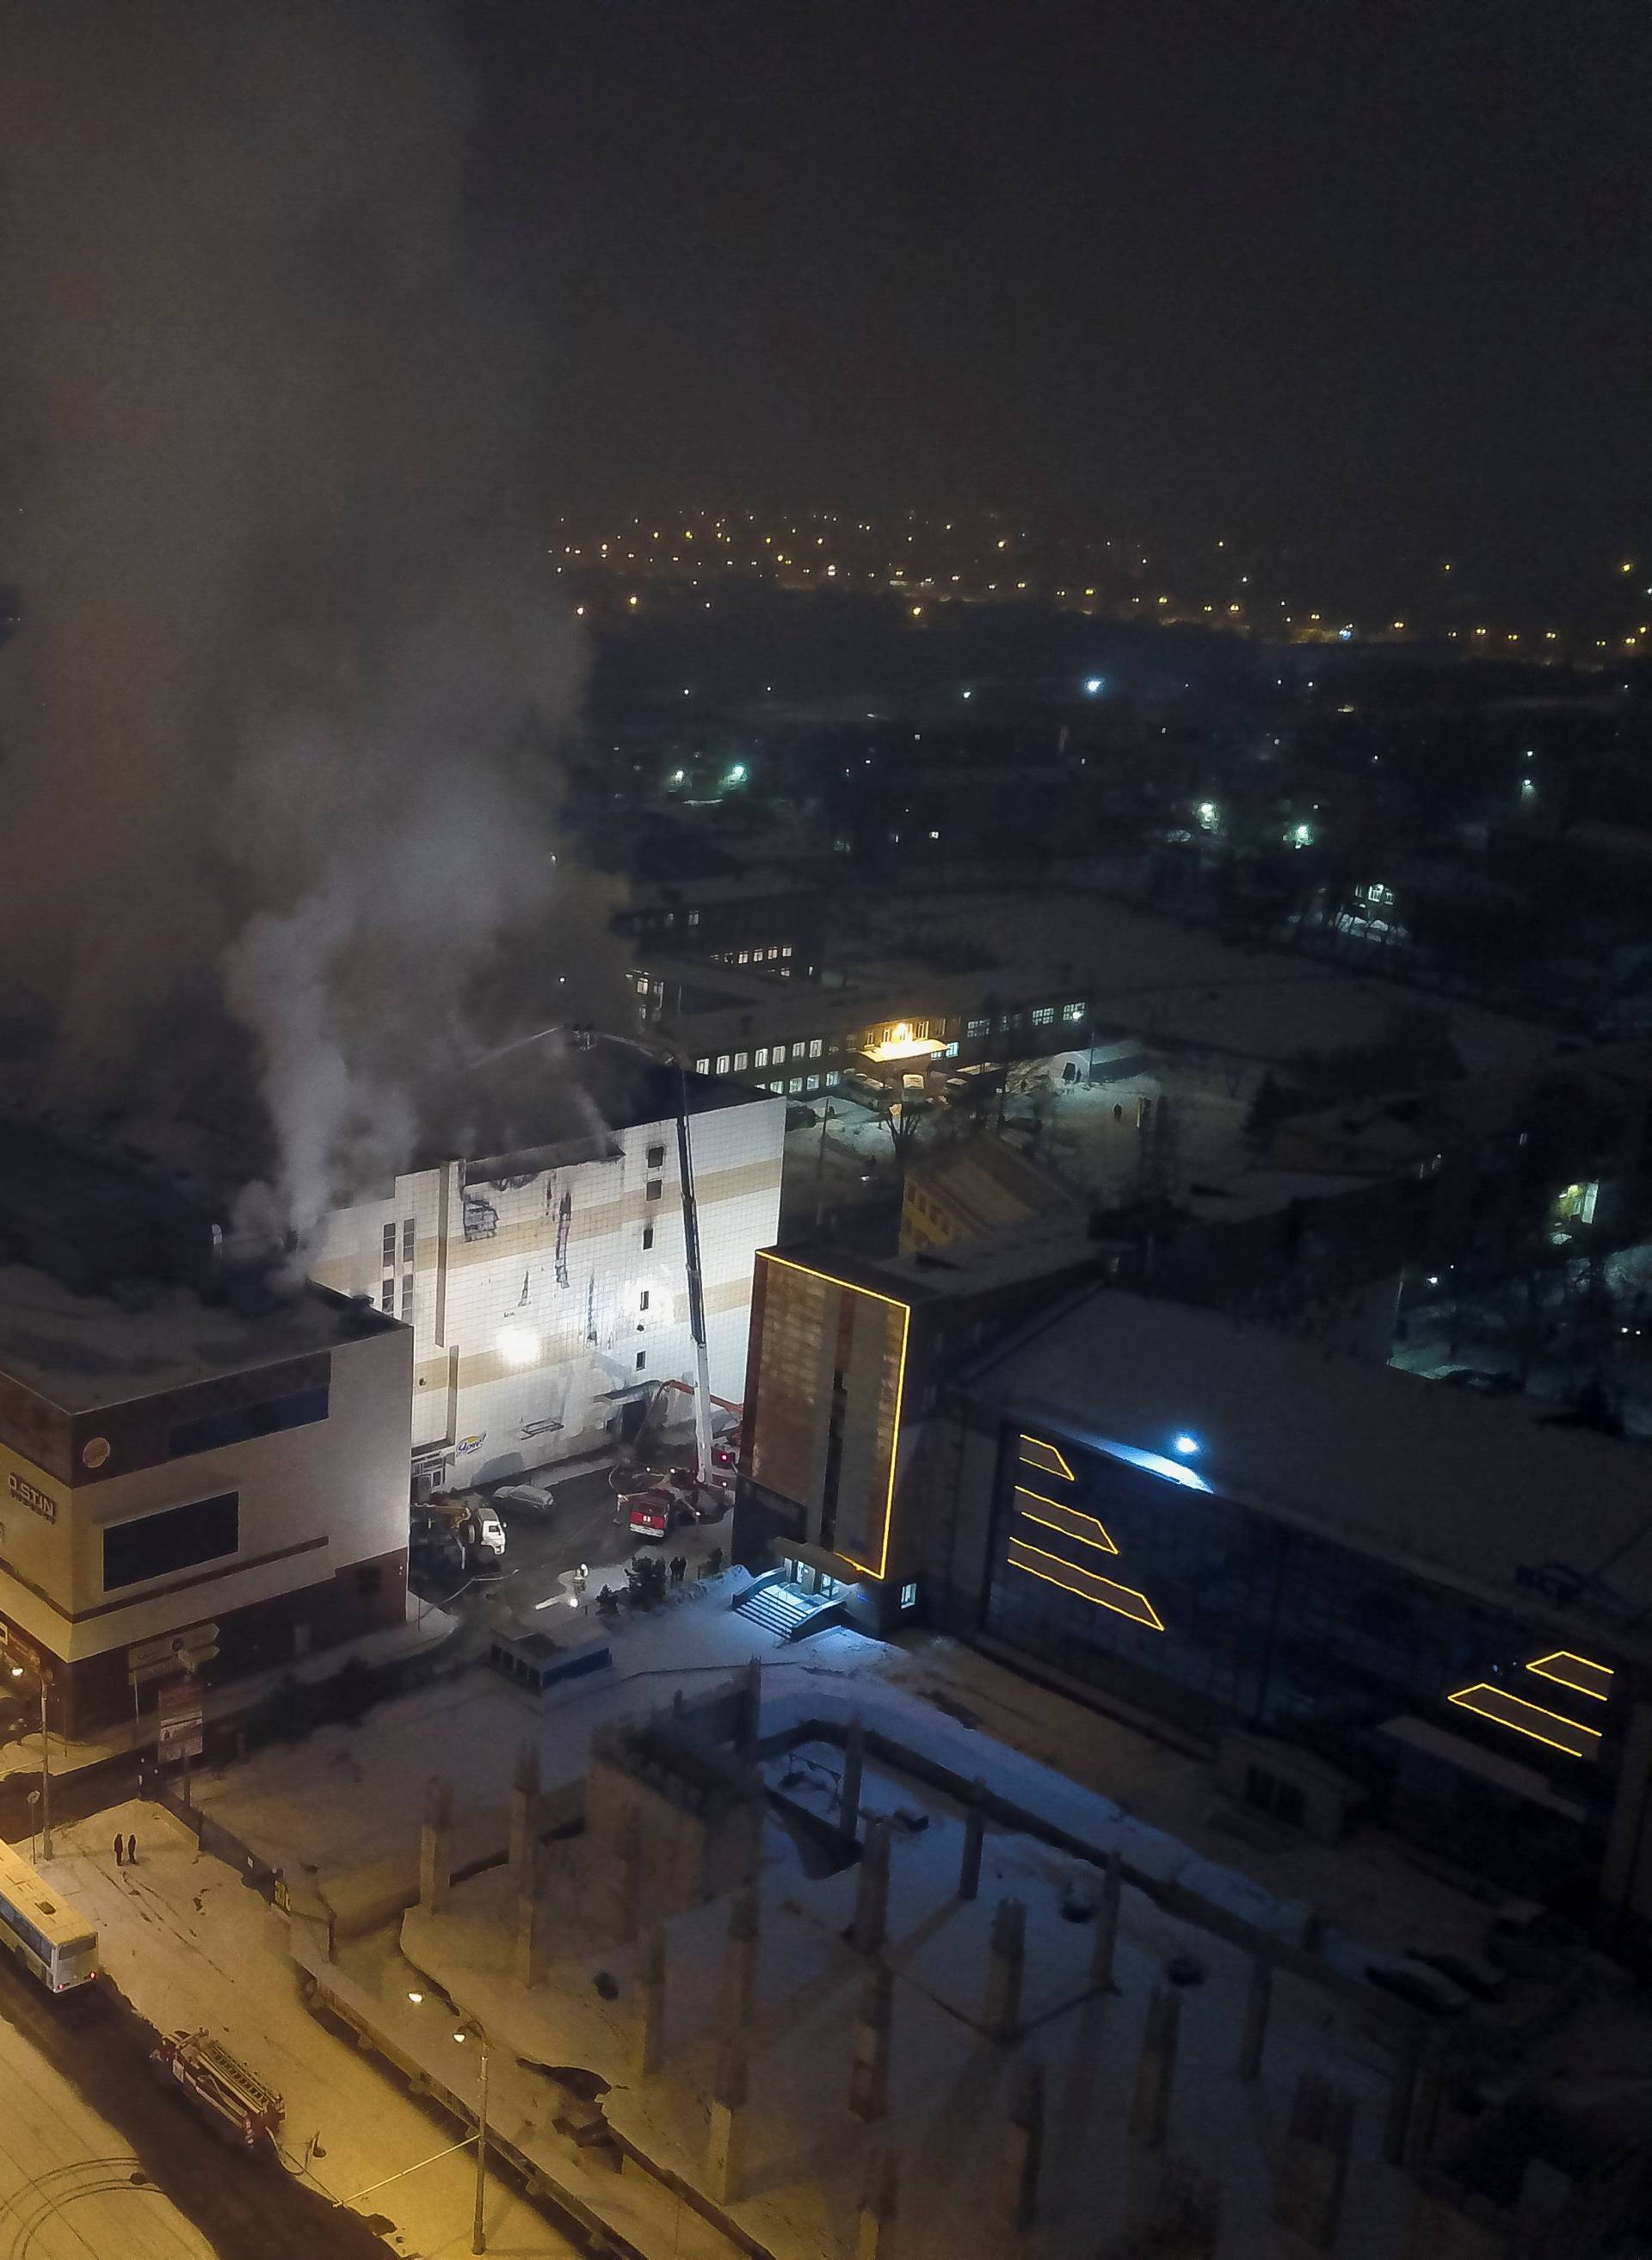 An aerial view shows the scene of a fire in a shopping mall in Kemerovo